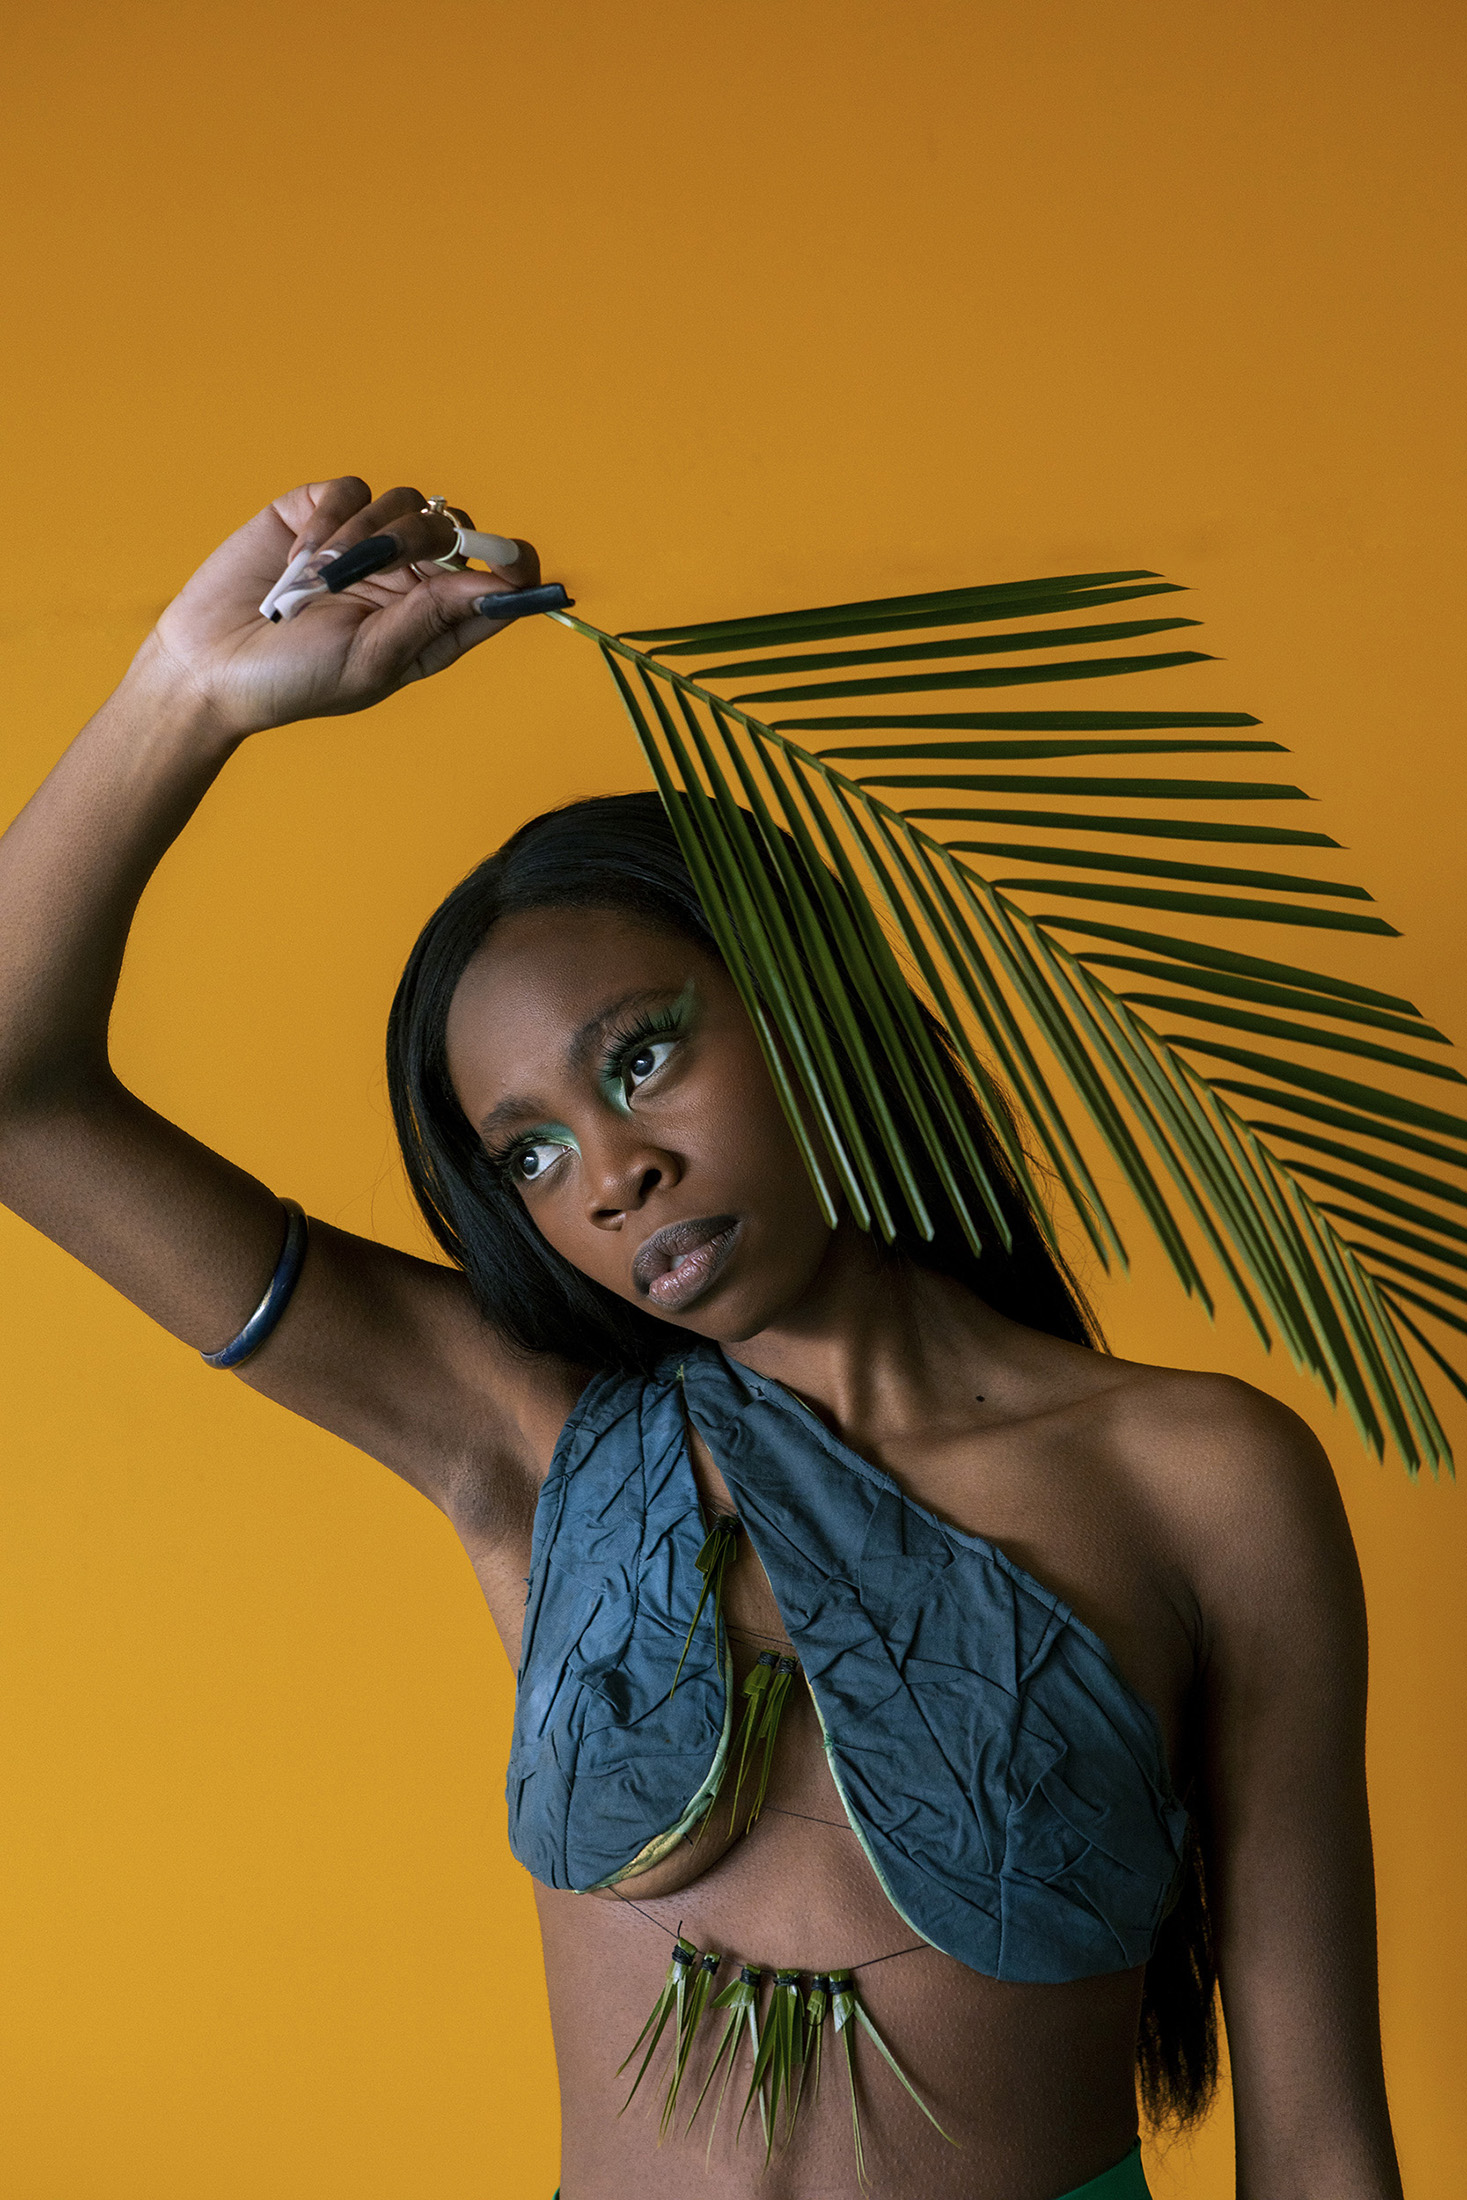 A portrait of a black woman in a handmade bralette. She stands in front of a vibrant yellow carpark wall, holding a large green leaf over her head.